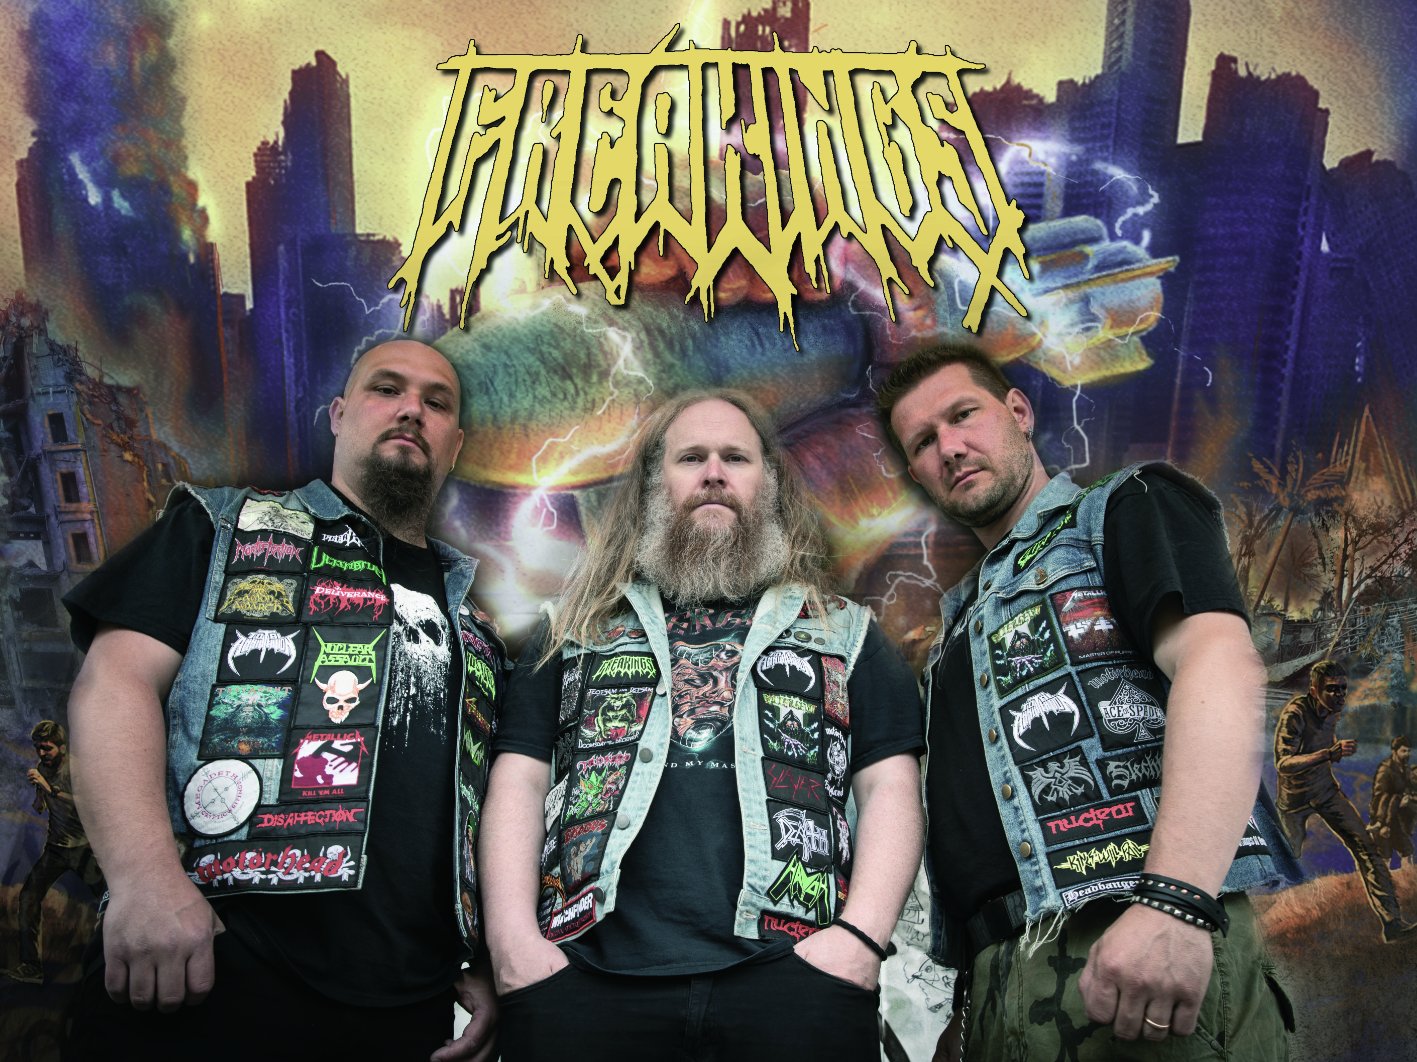 Interview with FREAKINGS